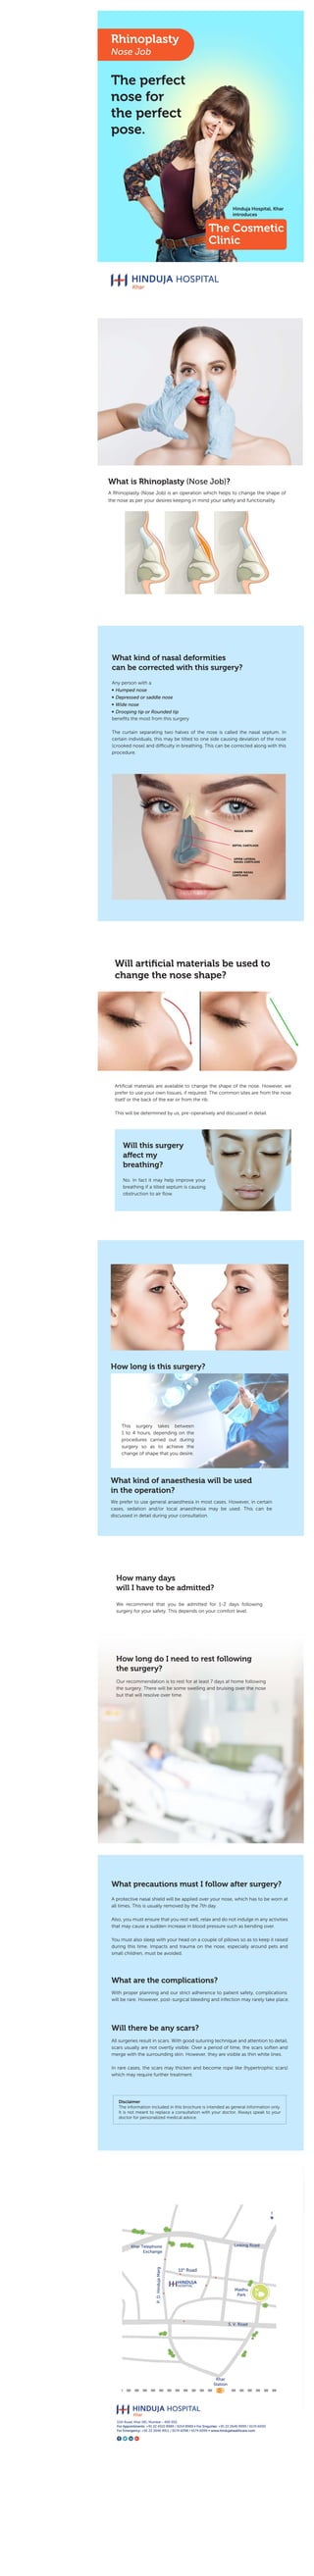 RhinoplastyRhinoplasty: The perfect nose for the perfect pose.